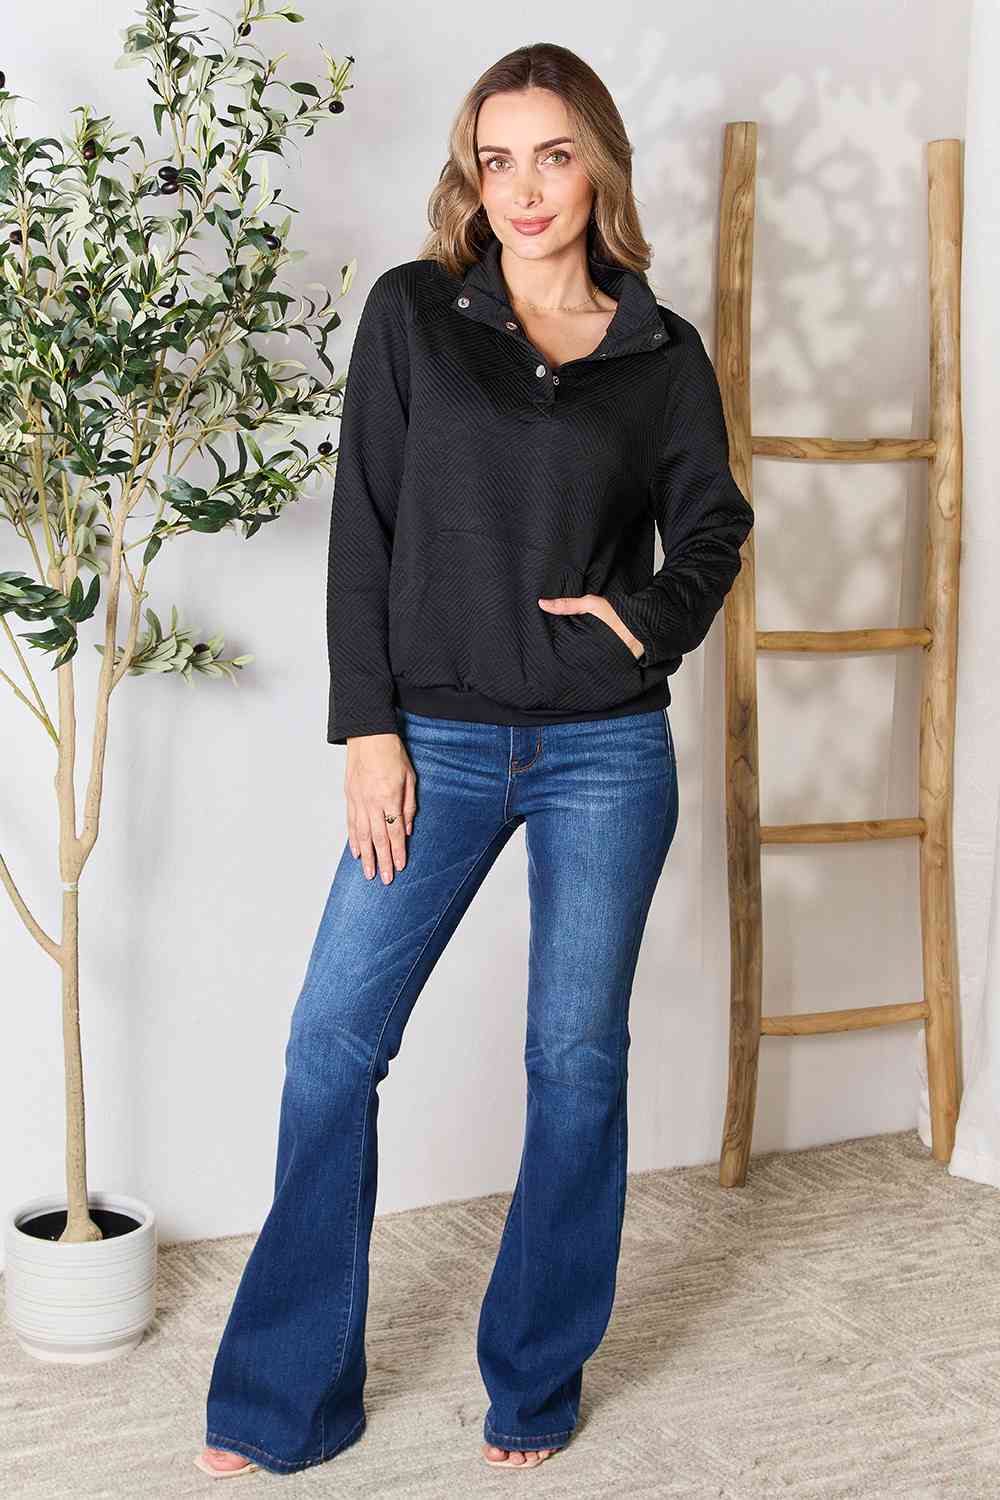 Double Take Half Buttoned Collared Neck Sweatshirt with Pocket 5